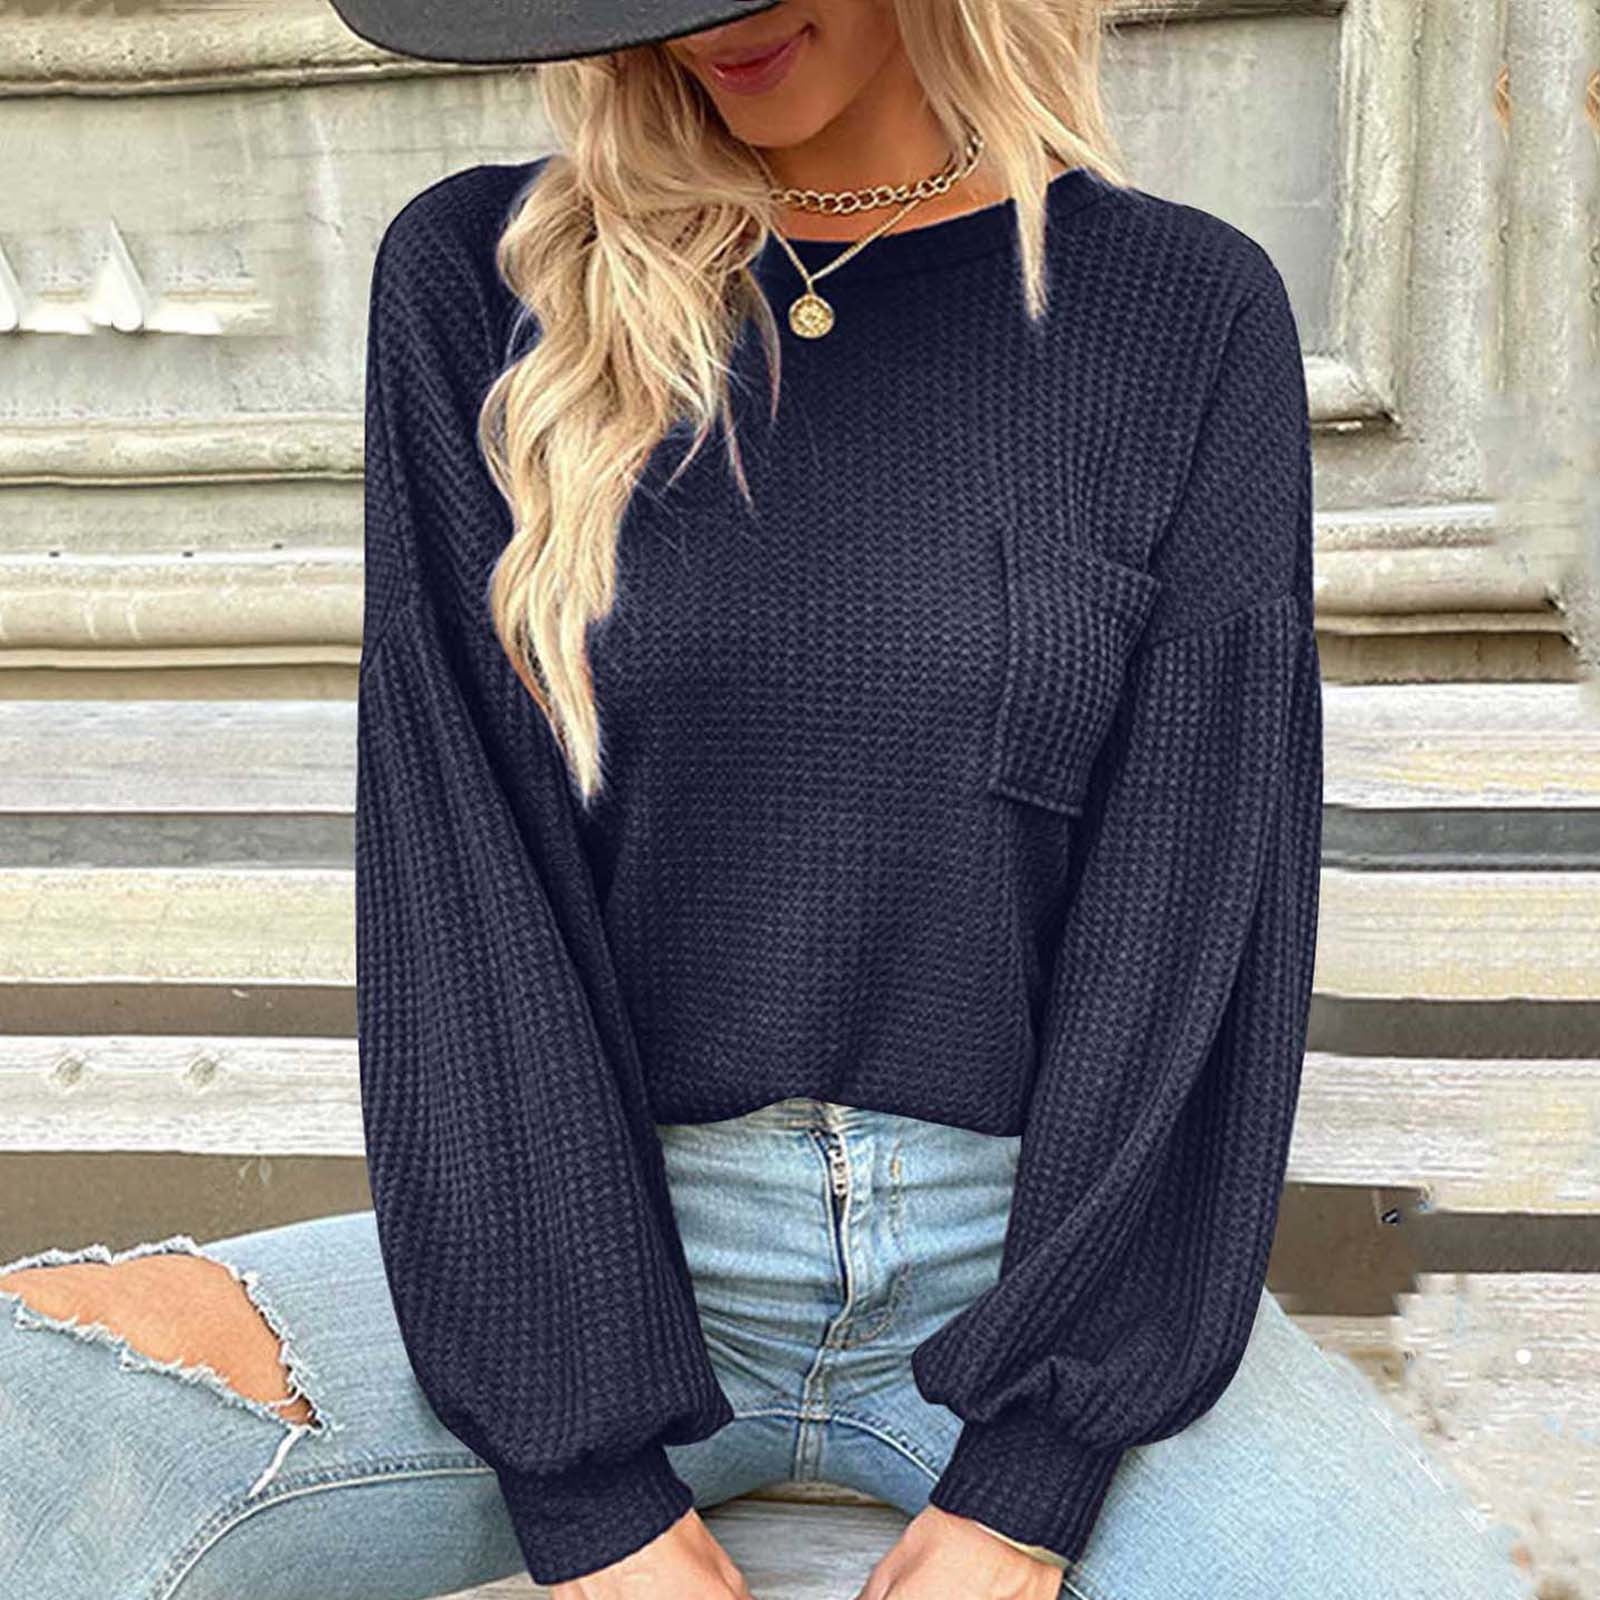 Hfyihgf Women Criss Cross V Back Sweaters Fall Trendy Loose Long Sleeve V- Neck Waffle Knitted Pullover Jumper Tops（Navy,M) 